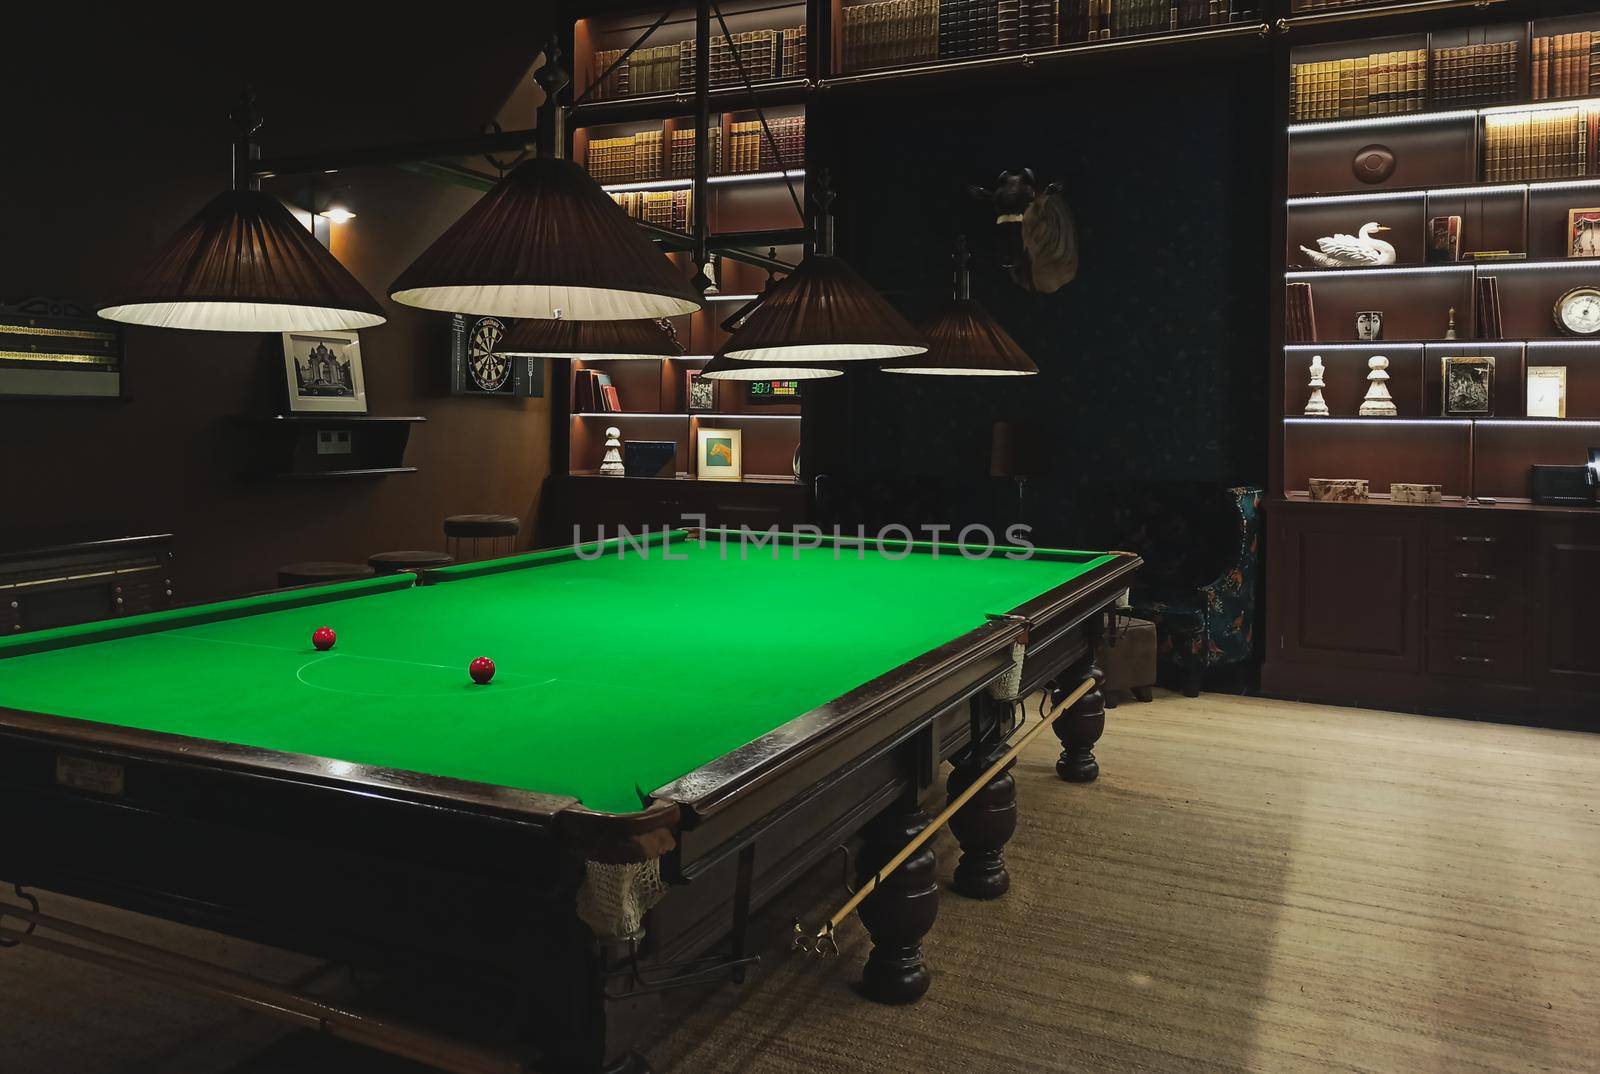 A full size snooker / billiards table in a classic style games room parlour